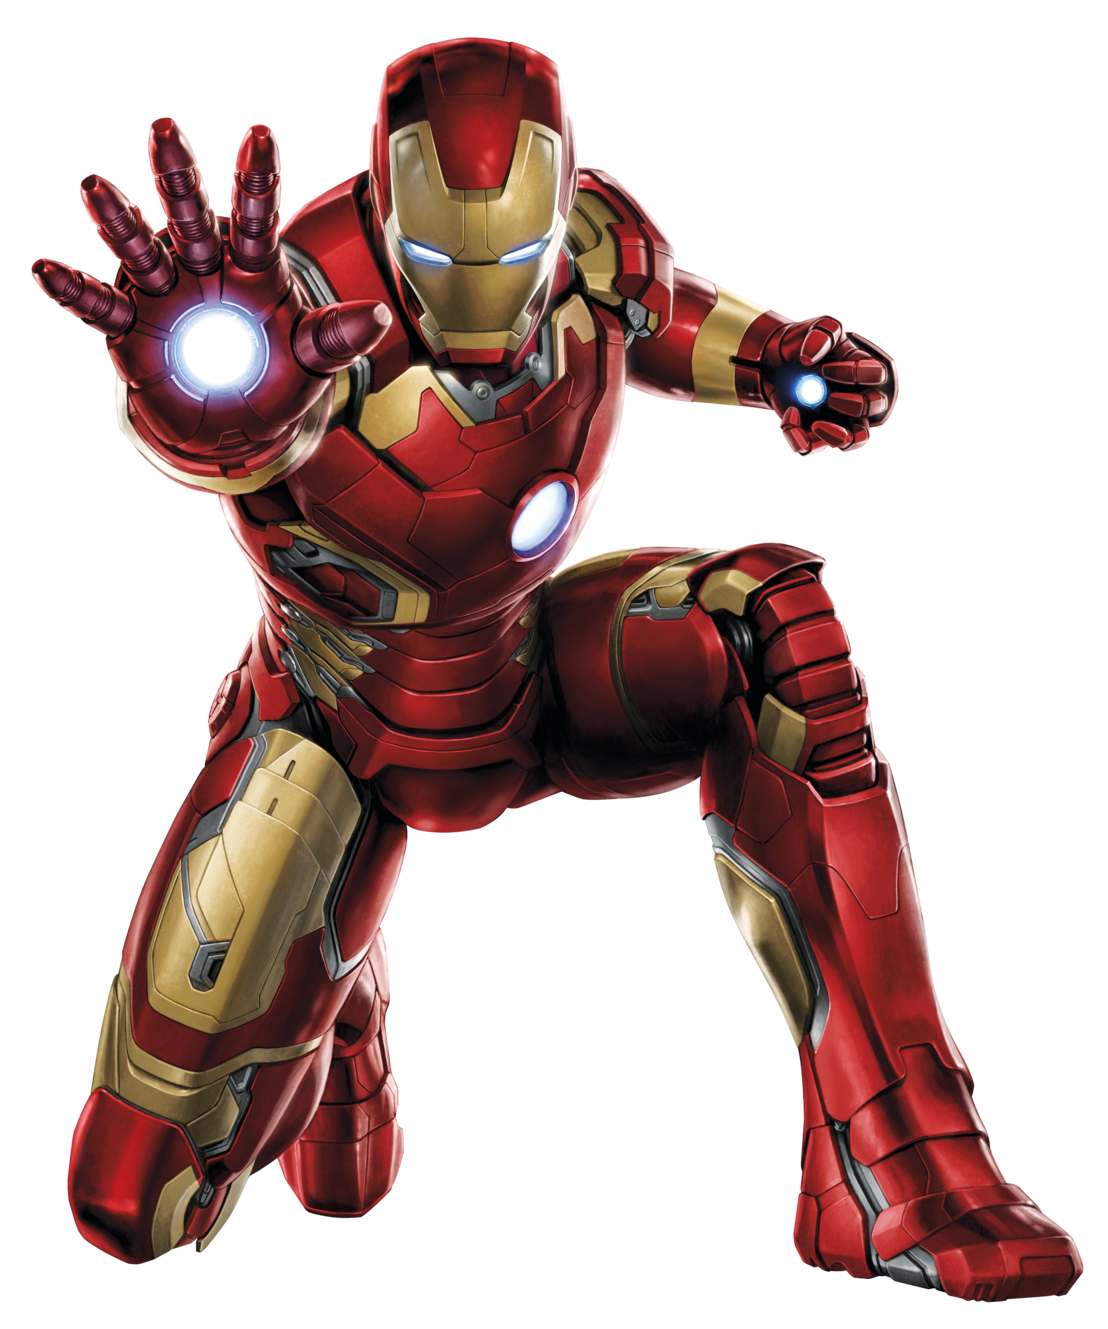 Iron Man Picture Png Image - Iron Man, Transparent background PNG HD thumbnail